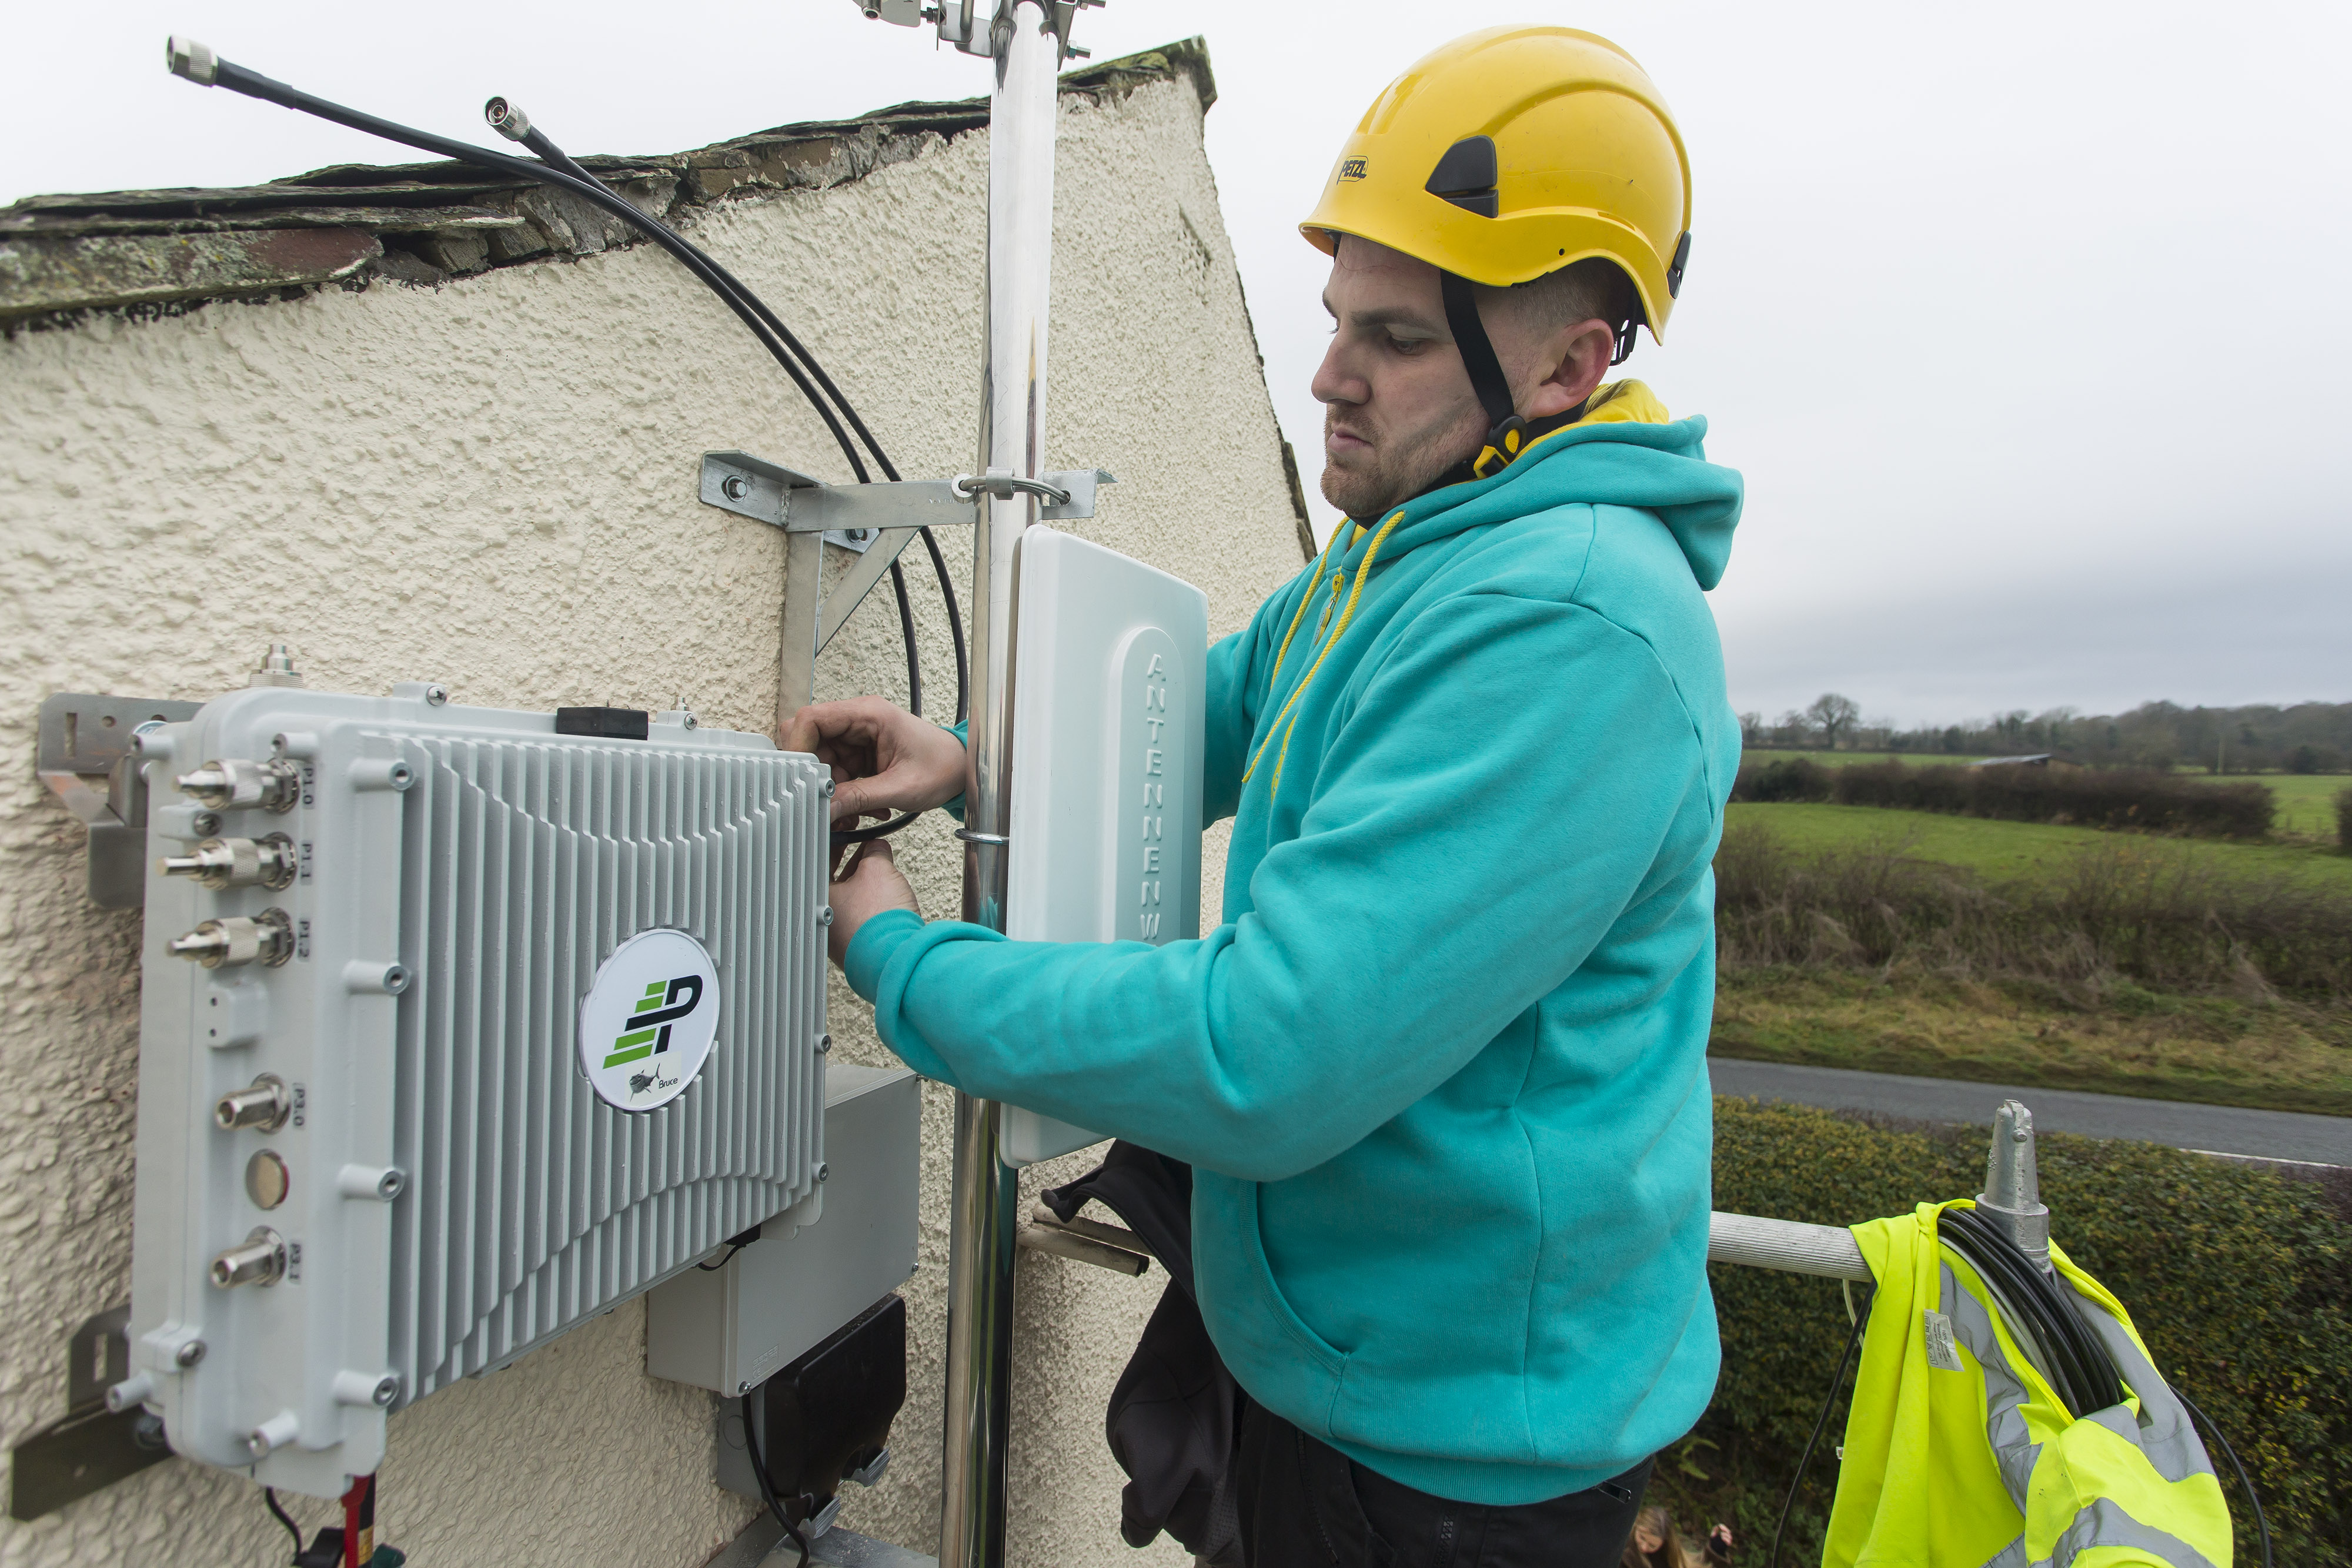 EE Micro Network Set to Connect 1,500 Rural Communities